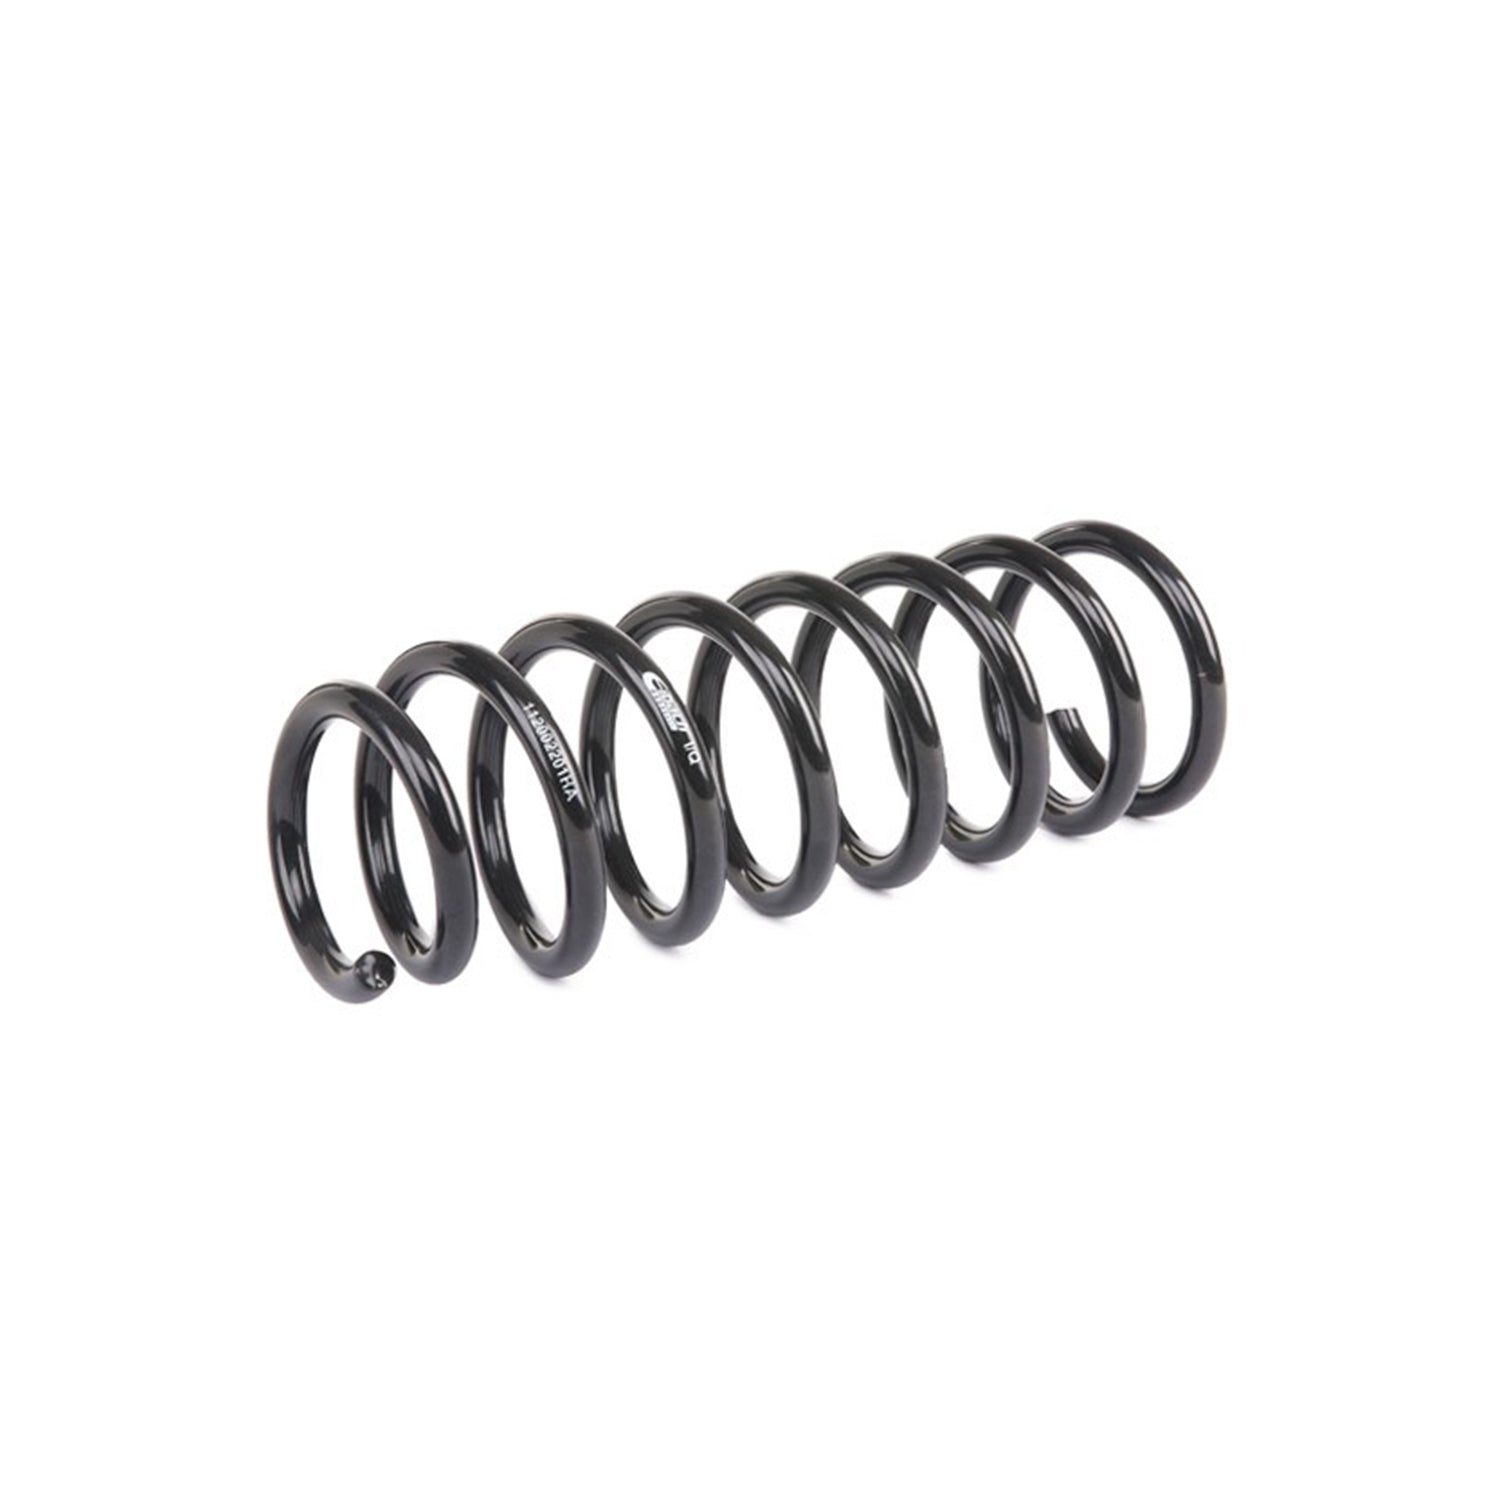 Eibach Audi RS5 F5 Coupe Pro Kit Lowering Springs